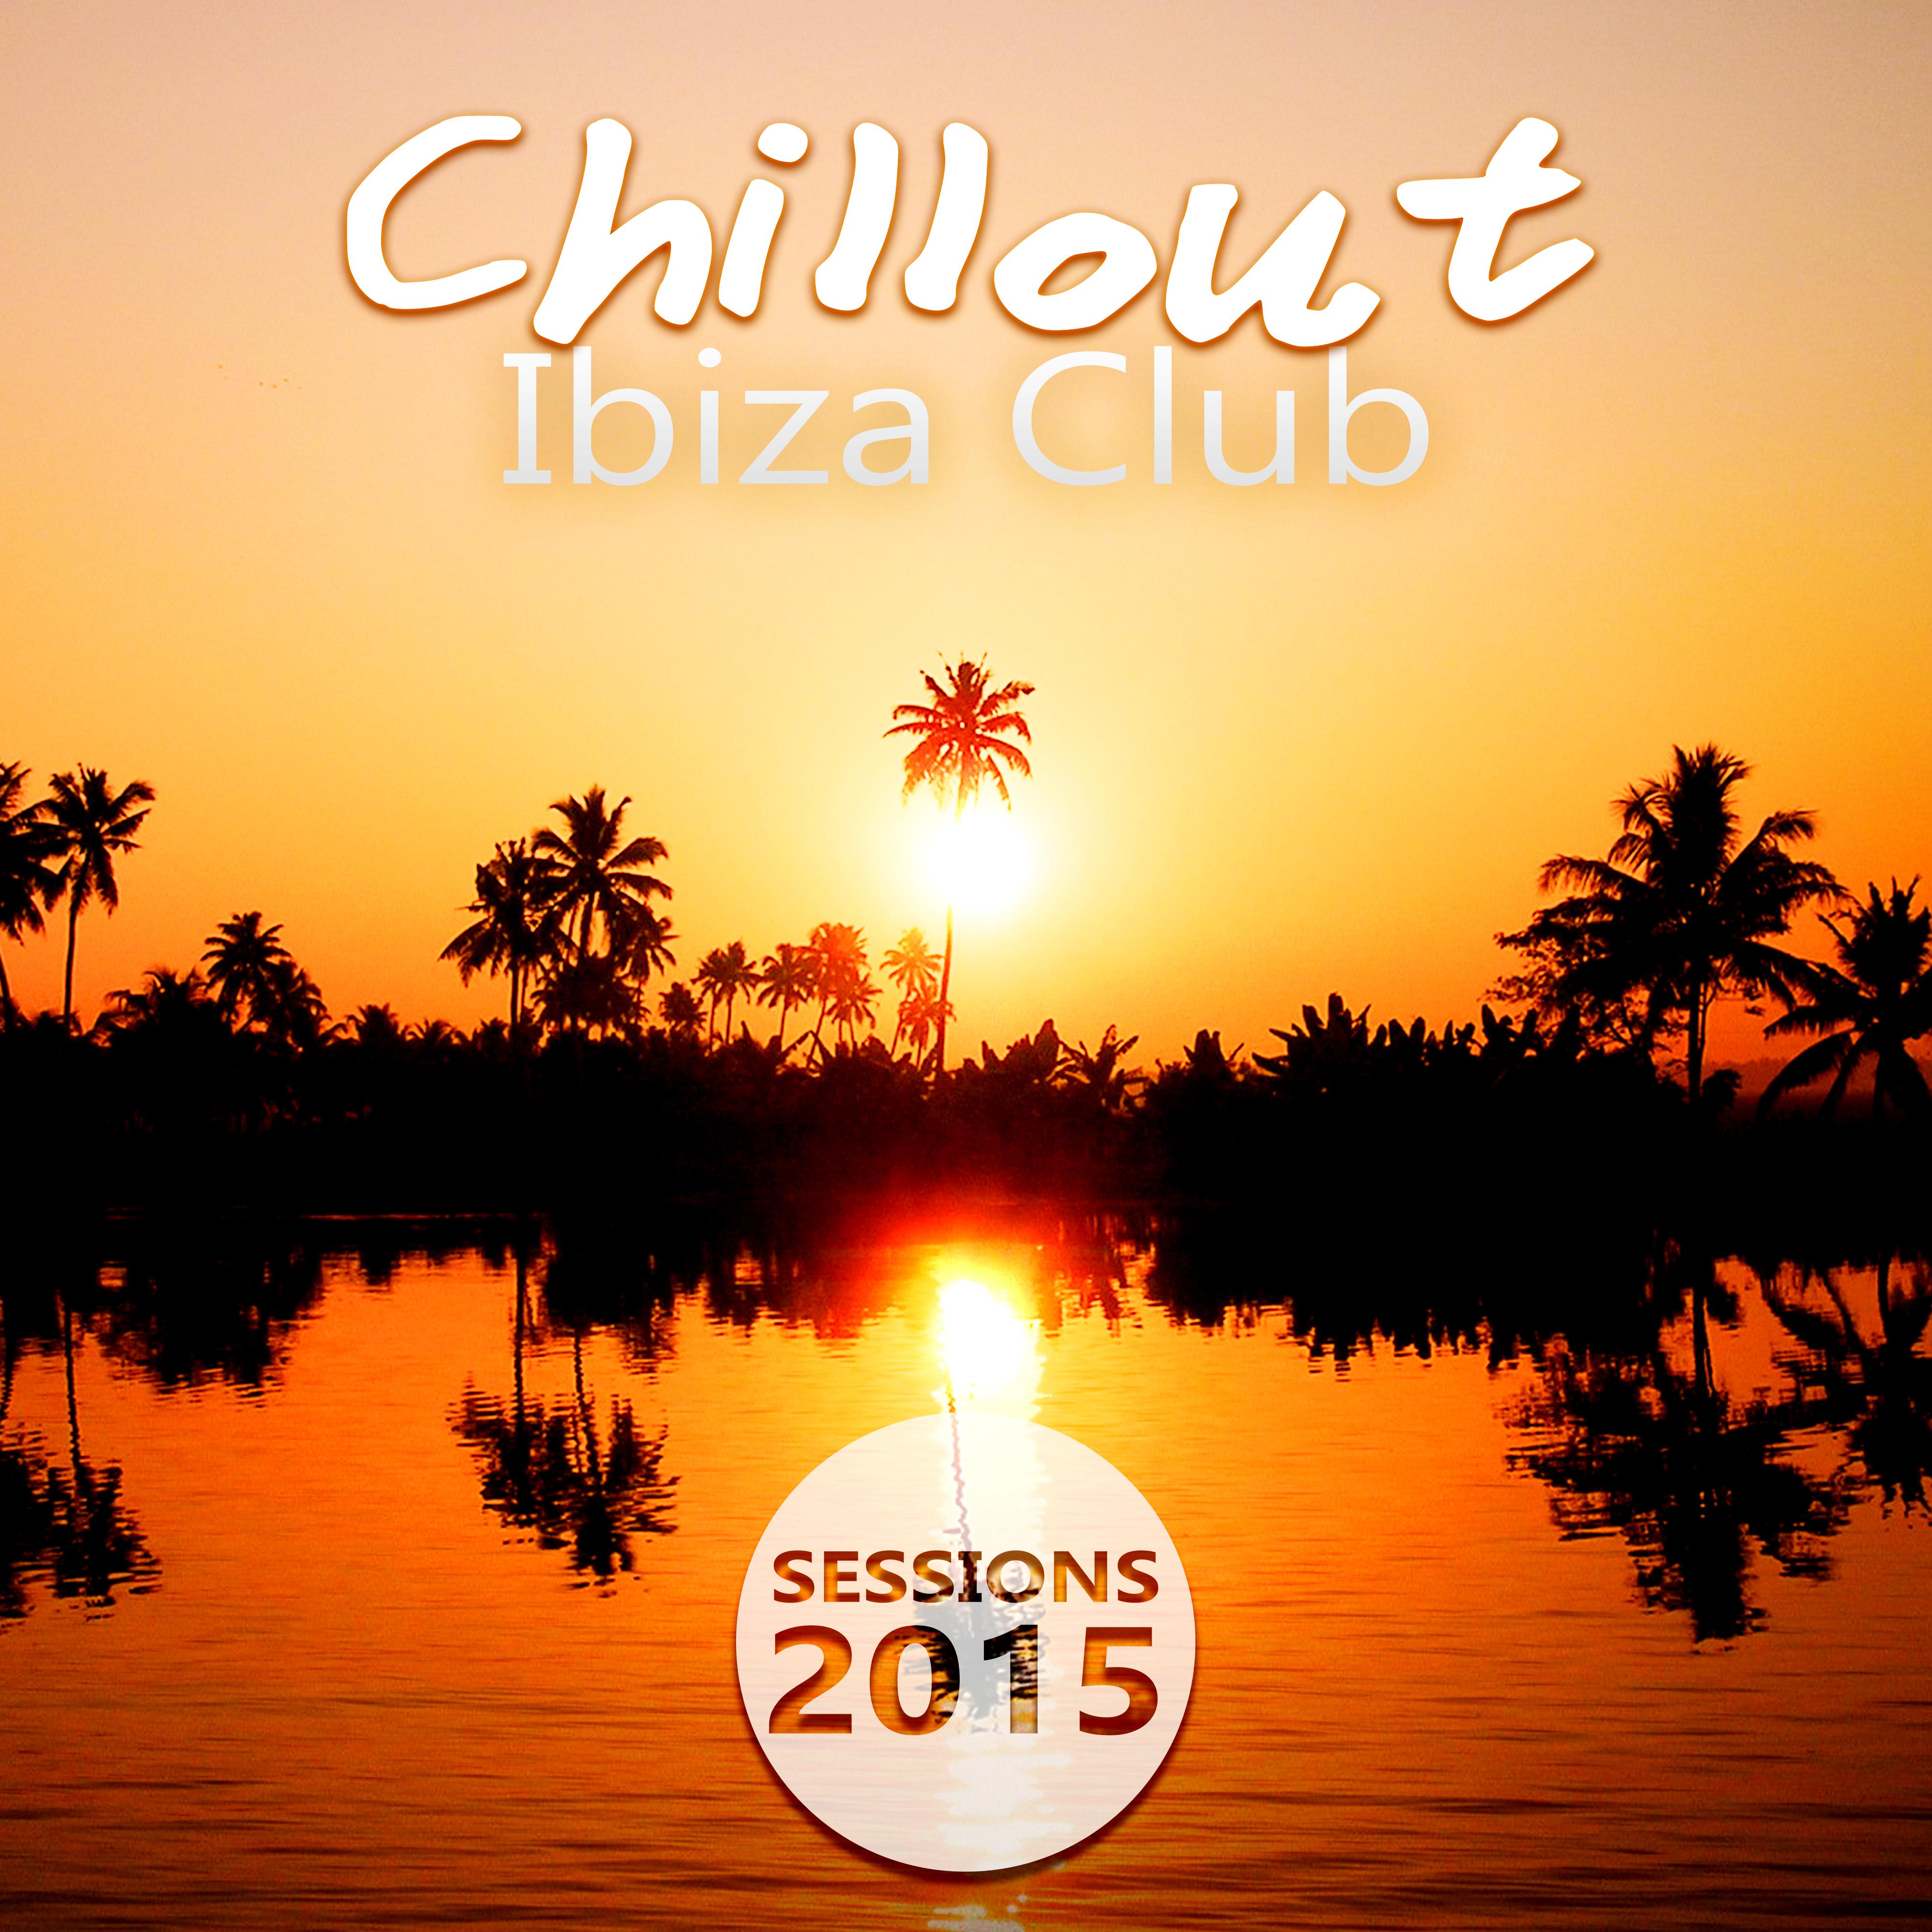 Chillout Ibiza Club Sessions 2015 - Chill Lounge Del Mar, Time to Relax, Cocktail Drinks, Beach Party, Rest, Coffee Lounge Music